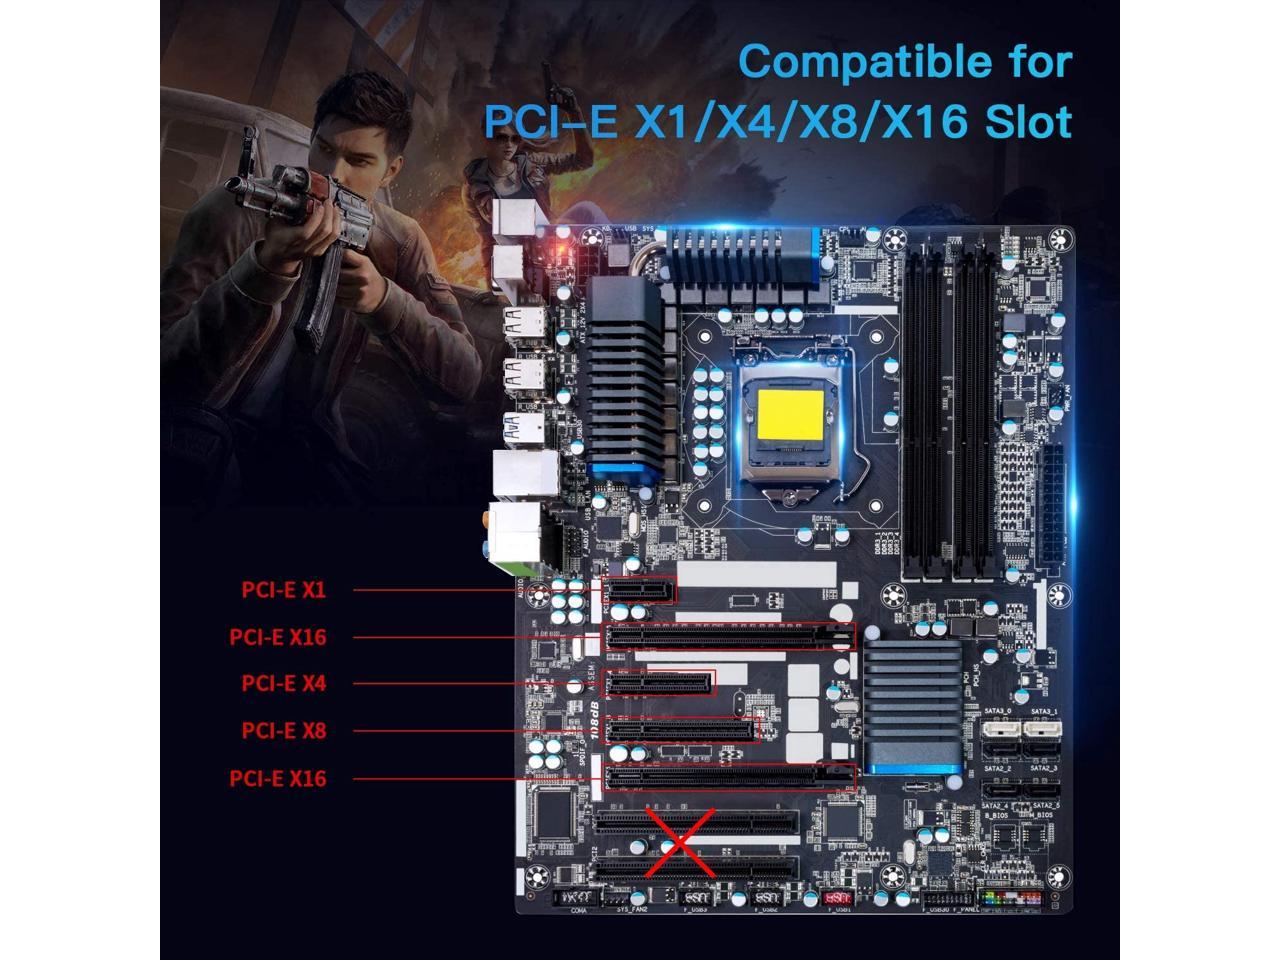 Wireless PCIE WiFi Card for Desktop PC 600Mbps, Dual Band (300Mbps 5GHz